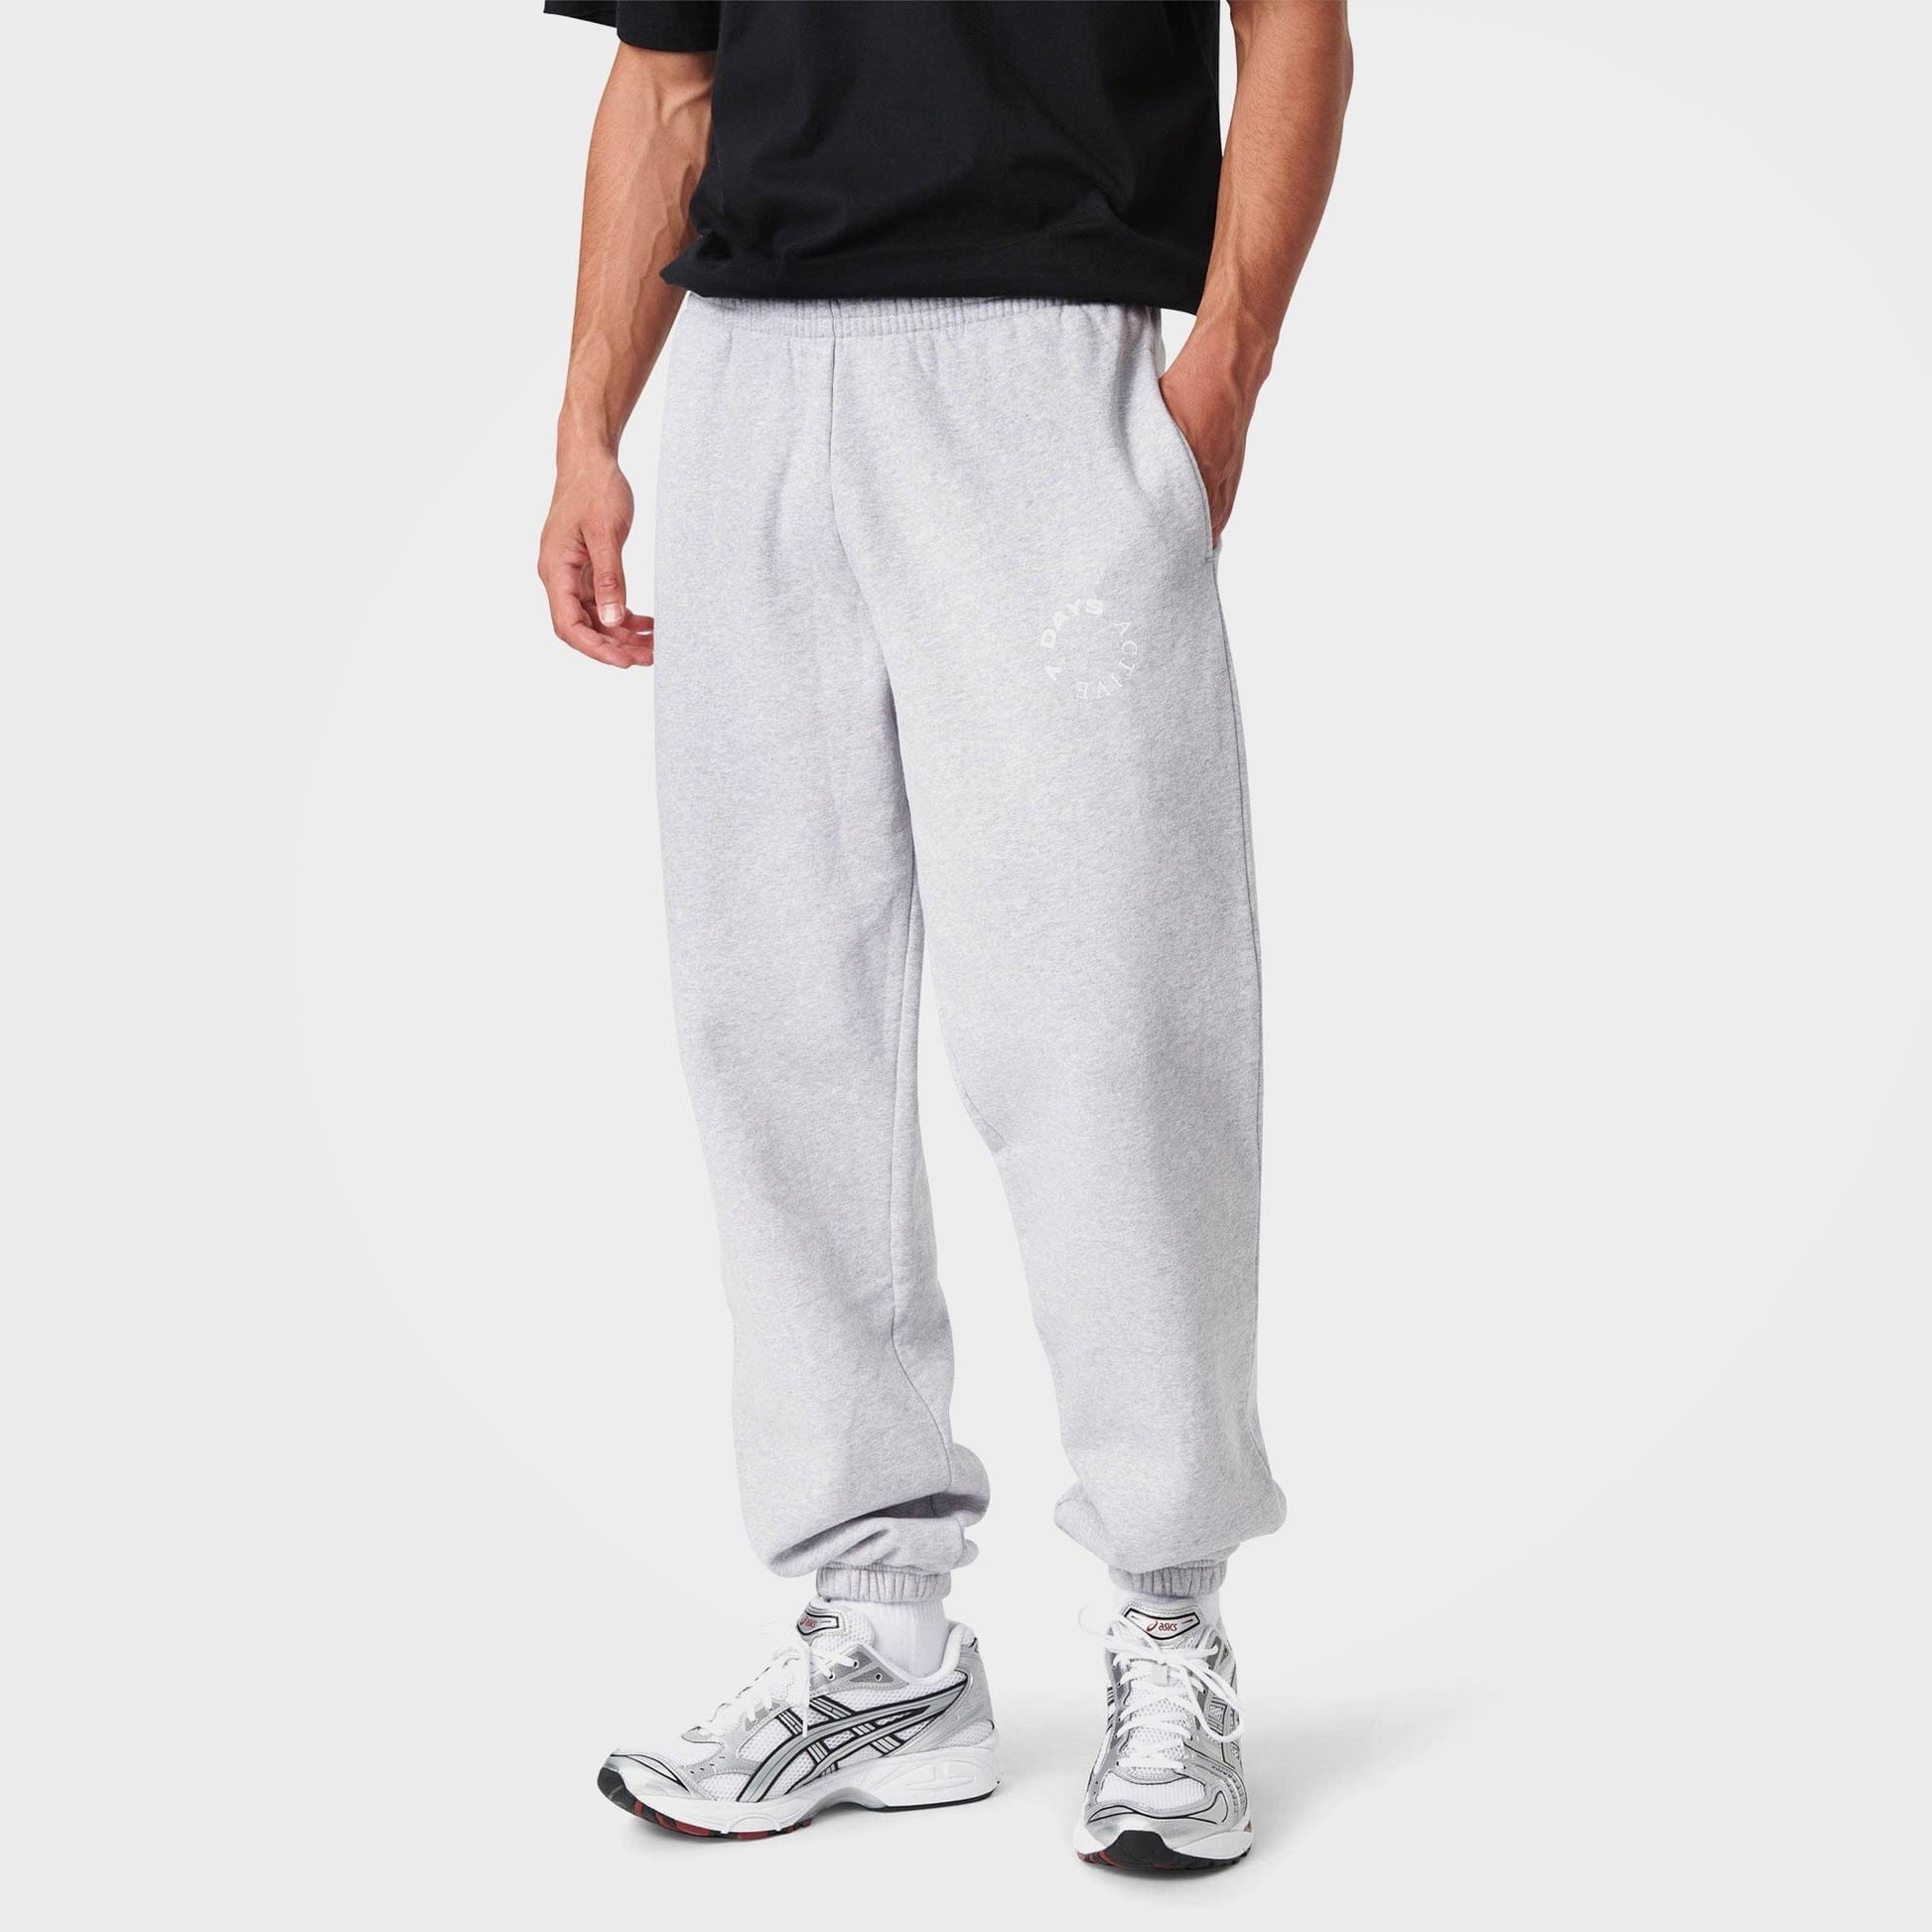 Heather Grey Organic Cotton Sweatpants by 7Days Active